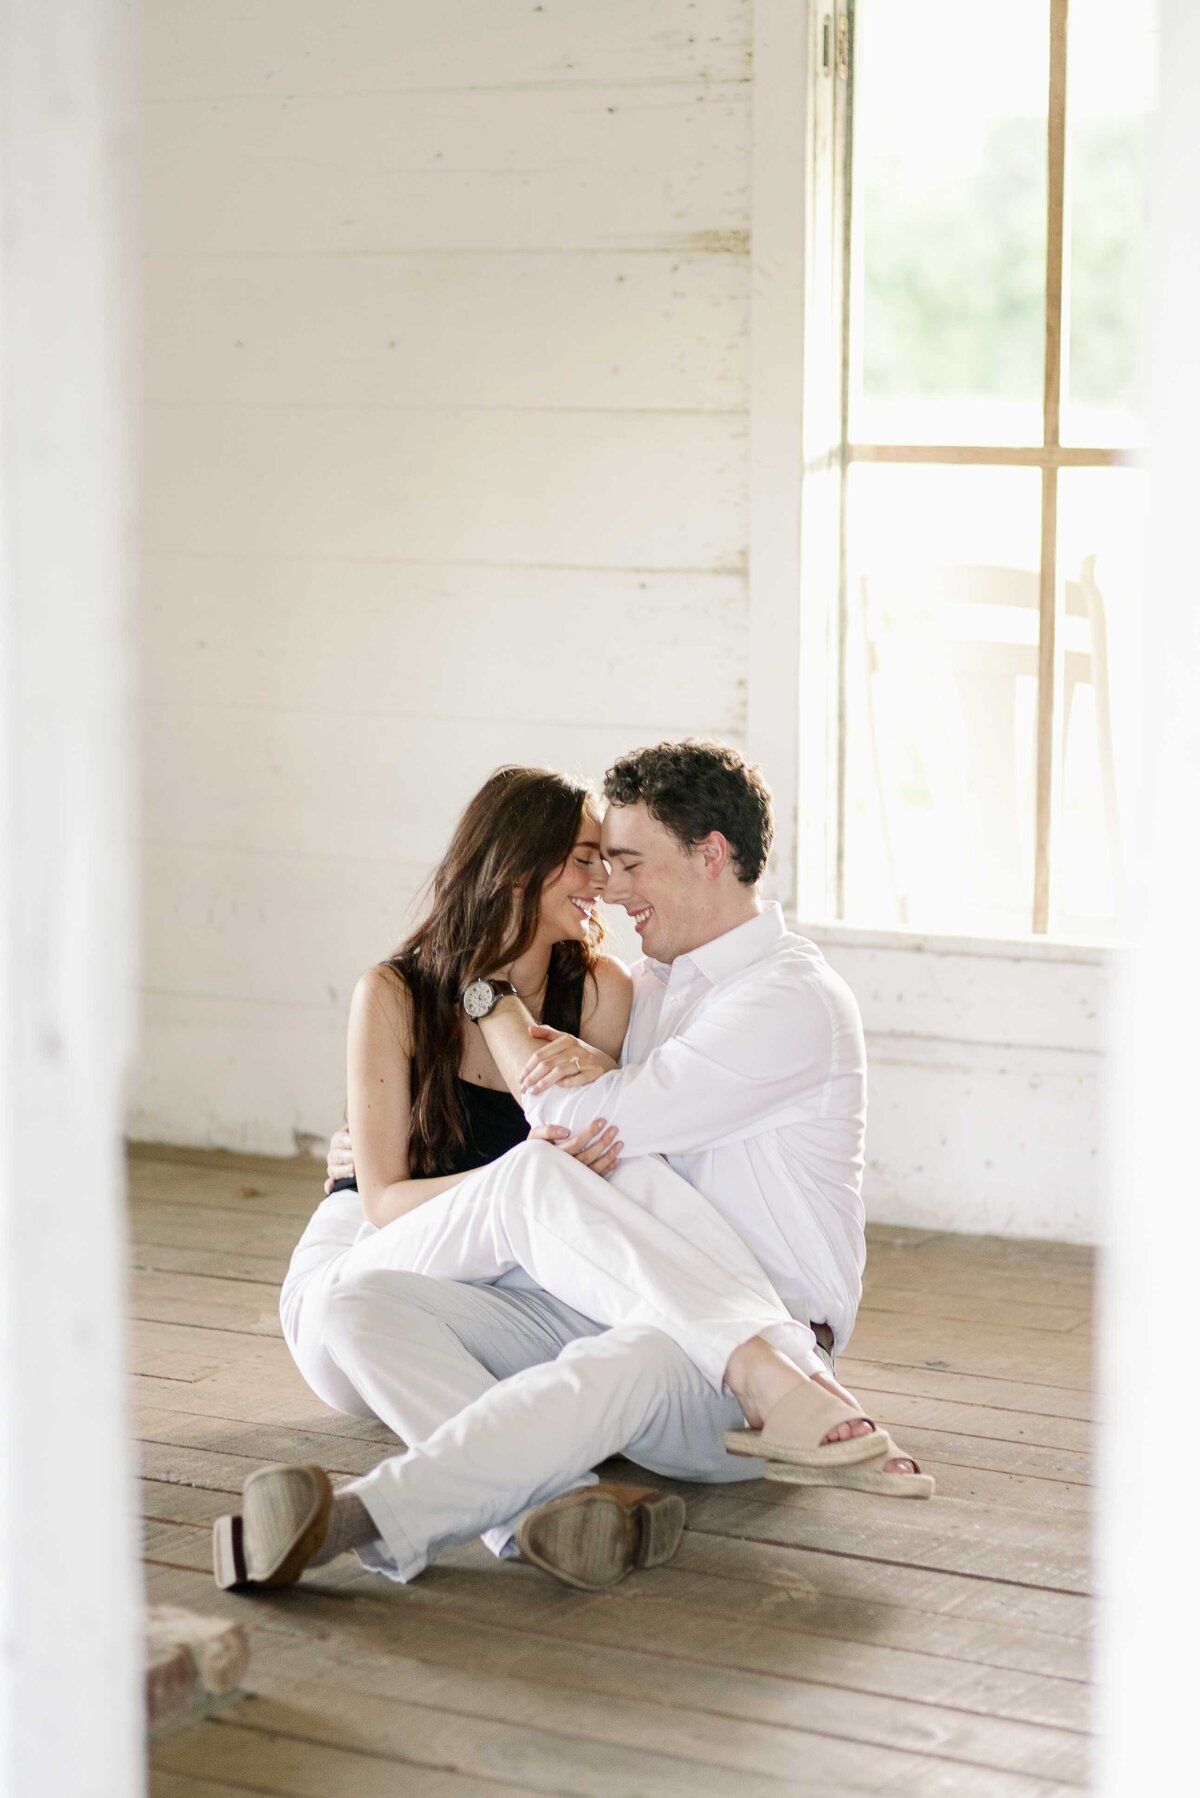 Alaina-Rene-Knoxville-Tennessee-Wedding-Engagement-Senior-Phtoography-Light-And-Airy_122